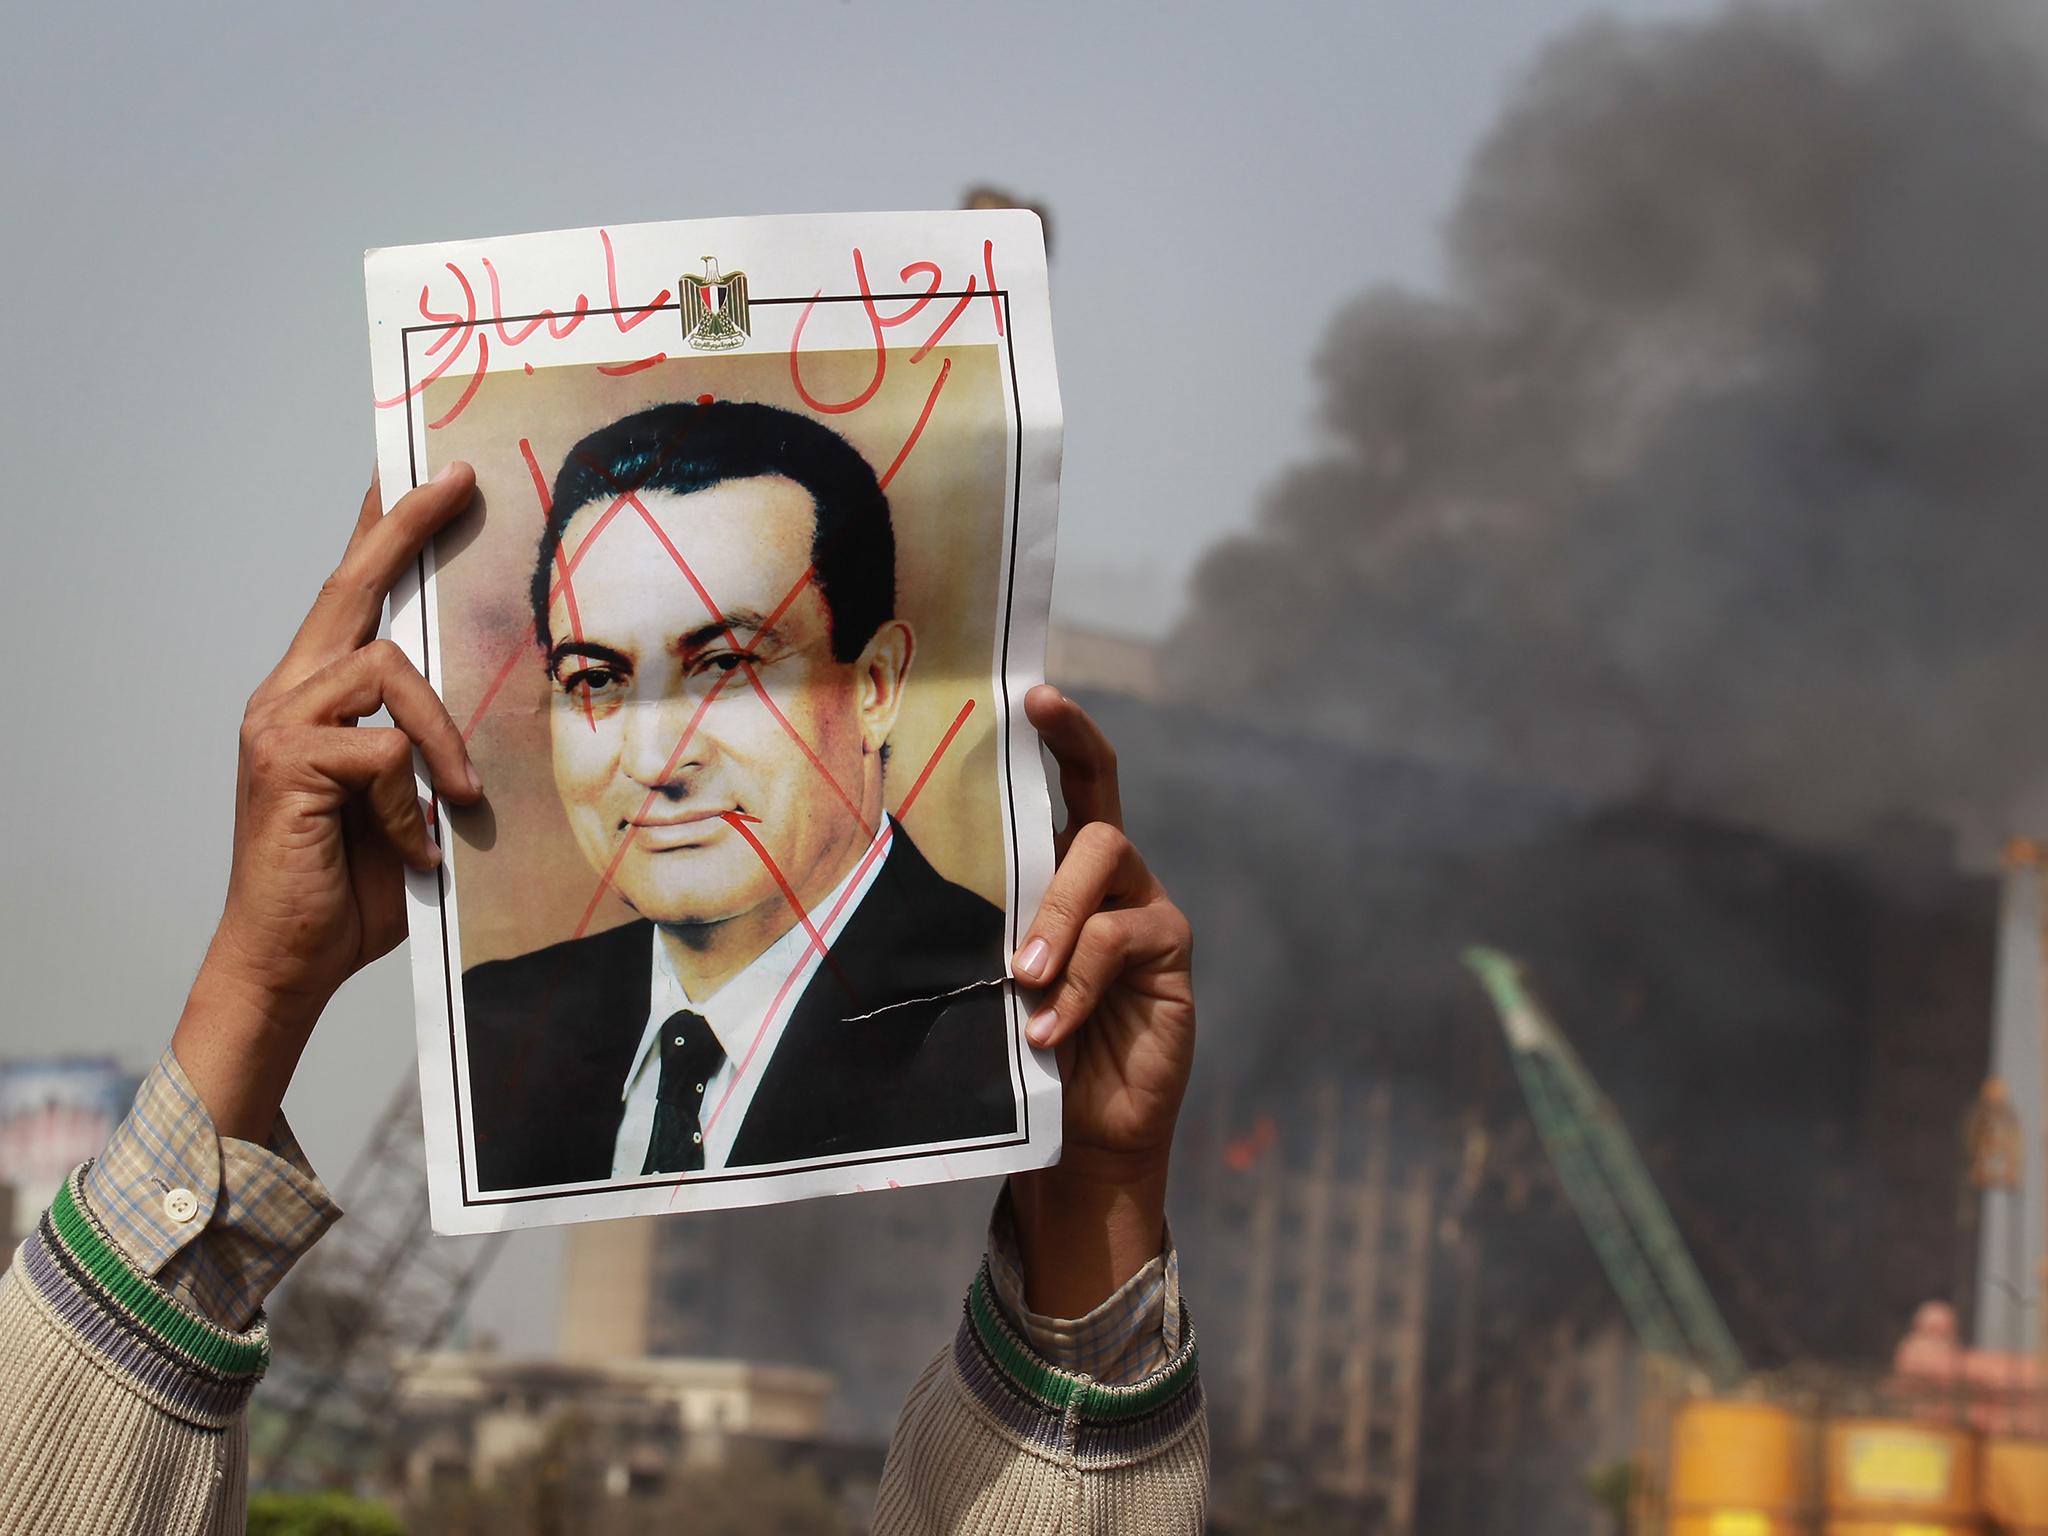 A protestor in Cairo’s Tahrir Square holds a photo showing President Mubarak’s face crossed out on 29 January, 2011